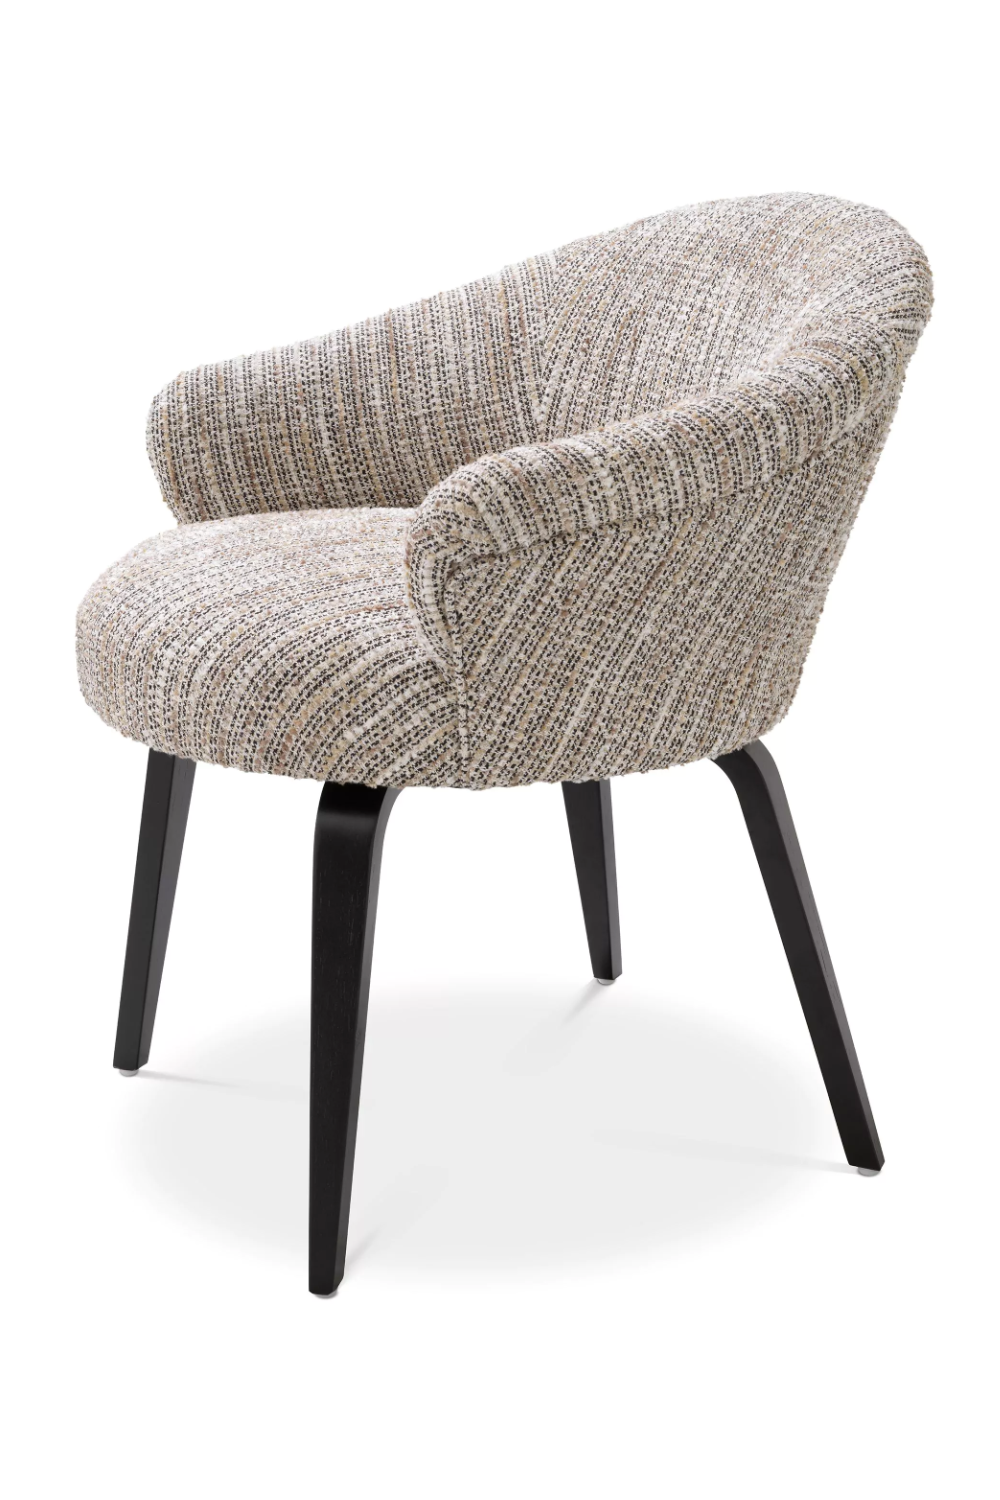 Upholstered Contemporary Dining Armchair | Eichholtz Moretti | Oroa.com